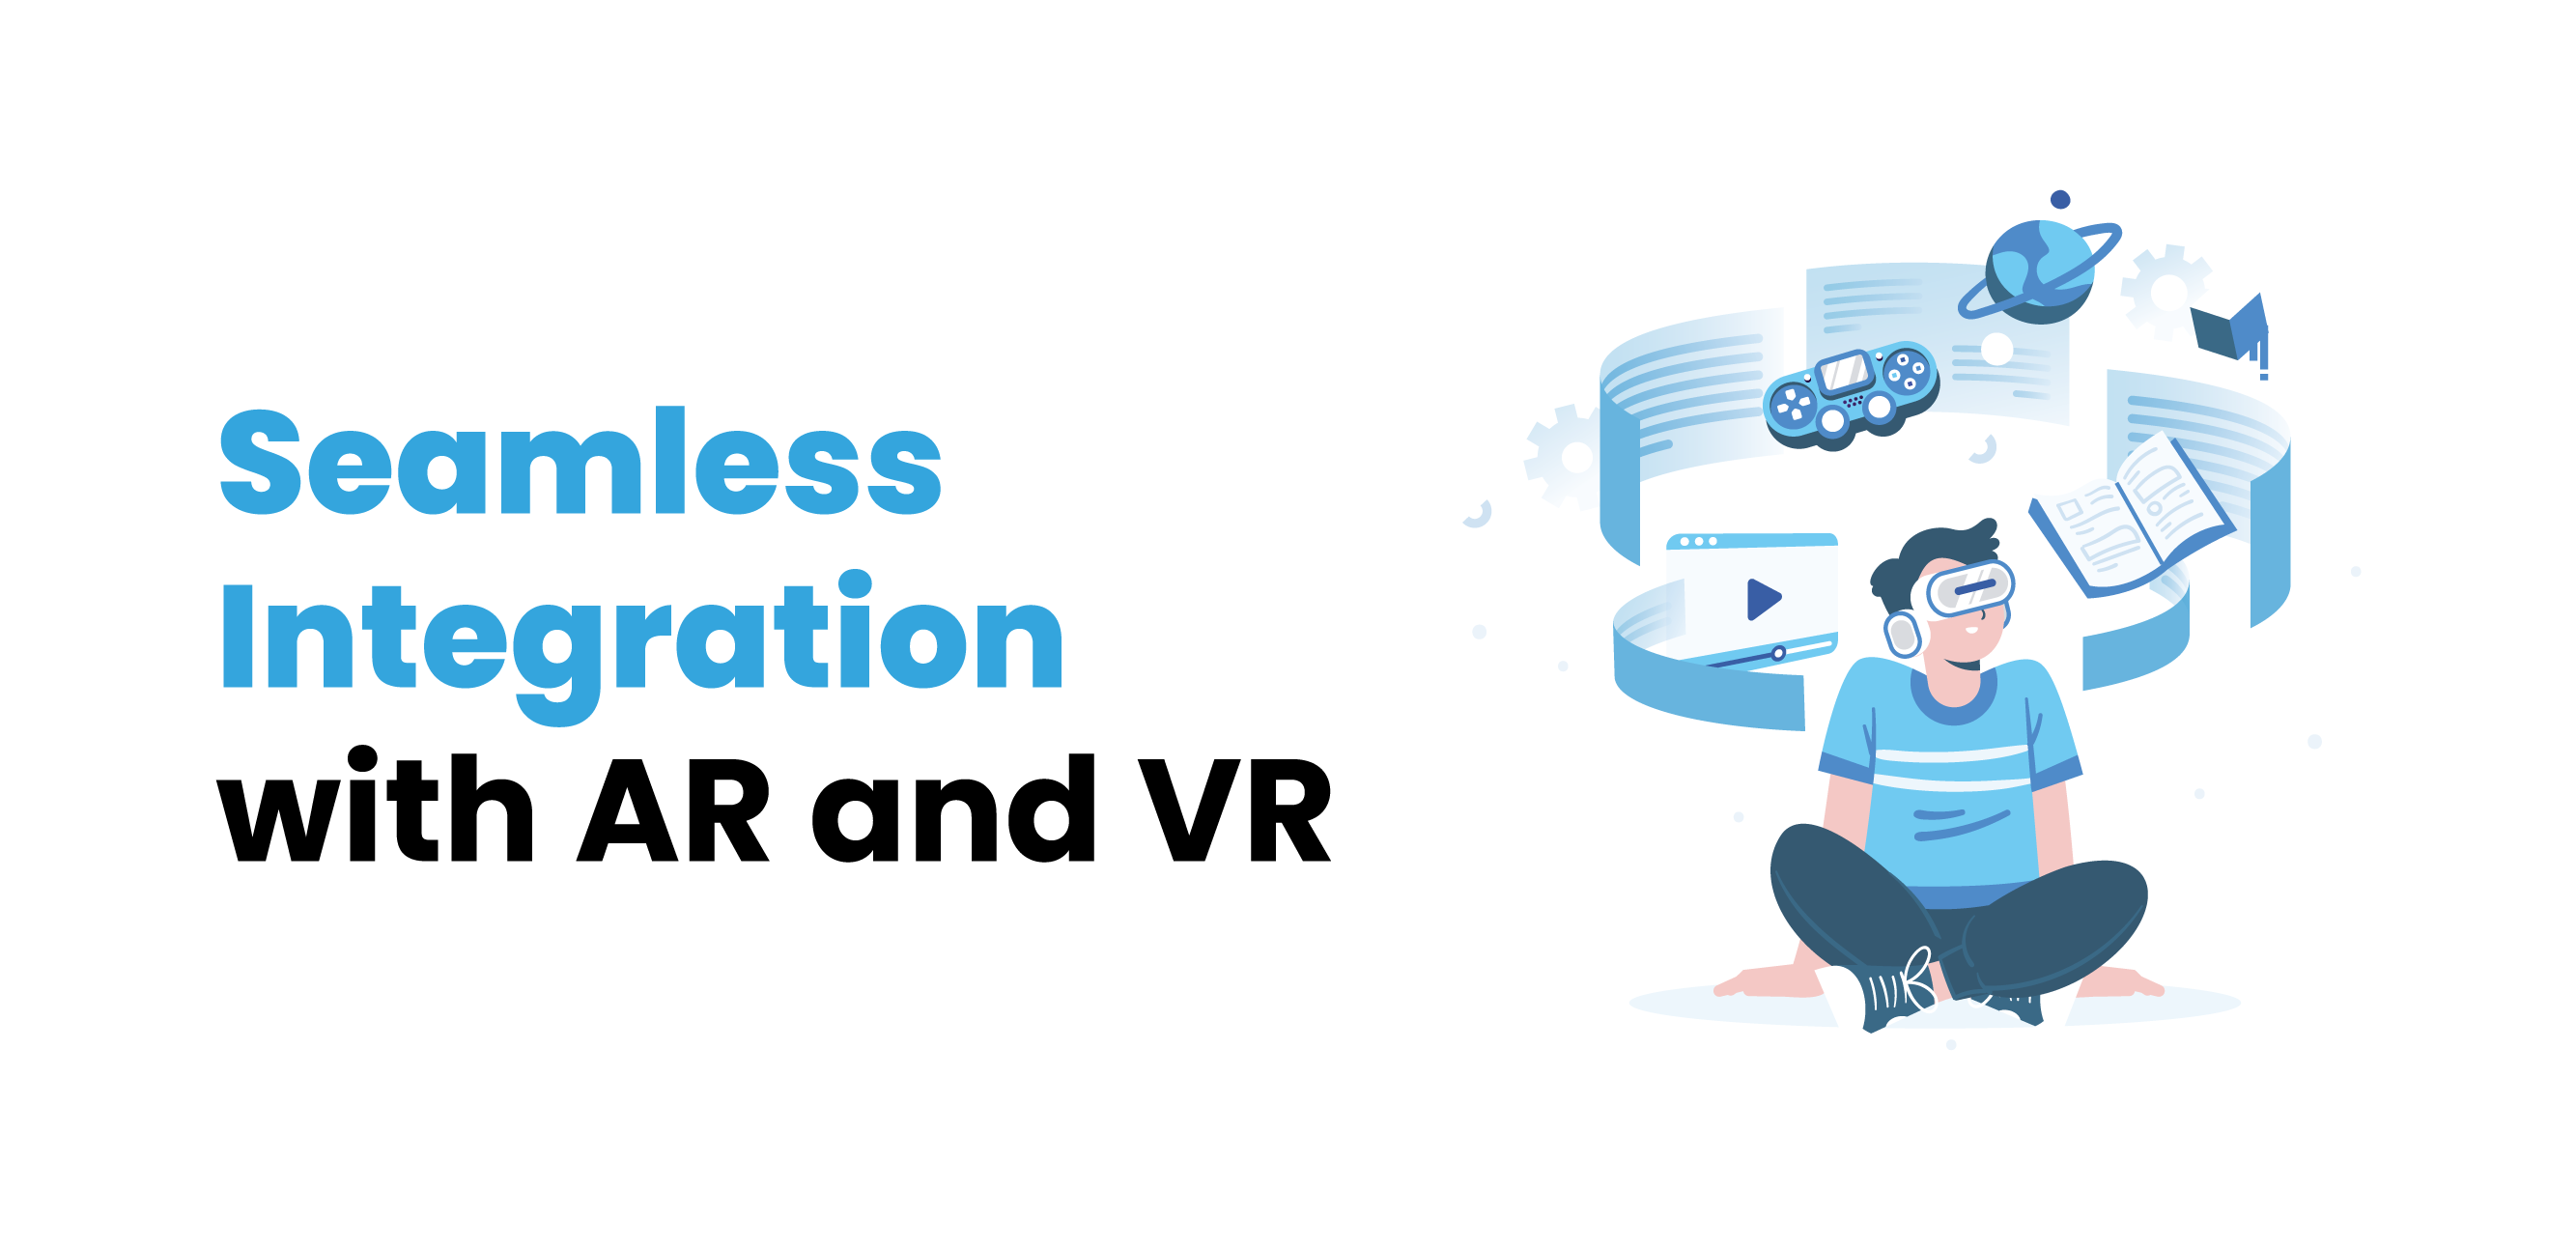 Seamless Integration with AR and VR